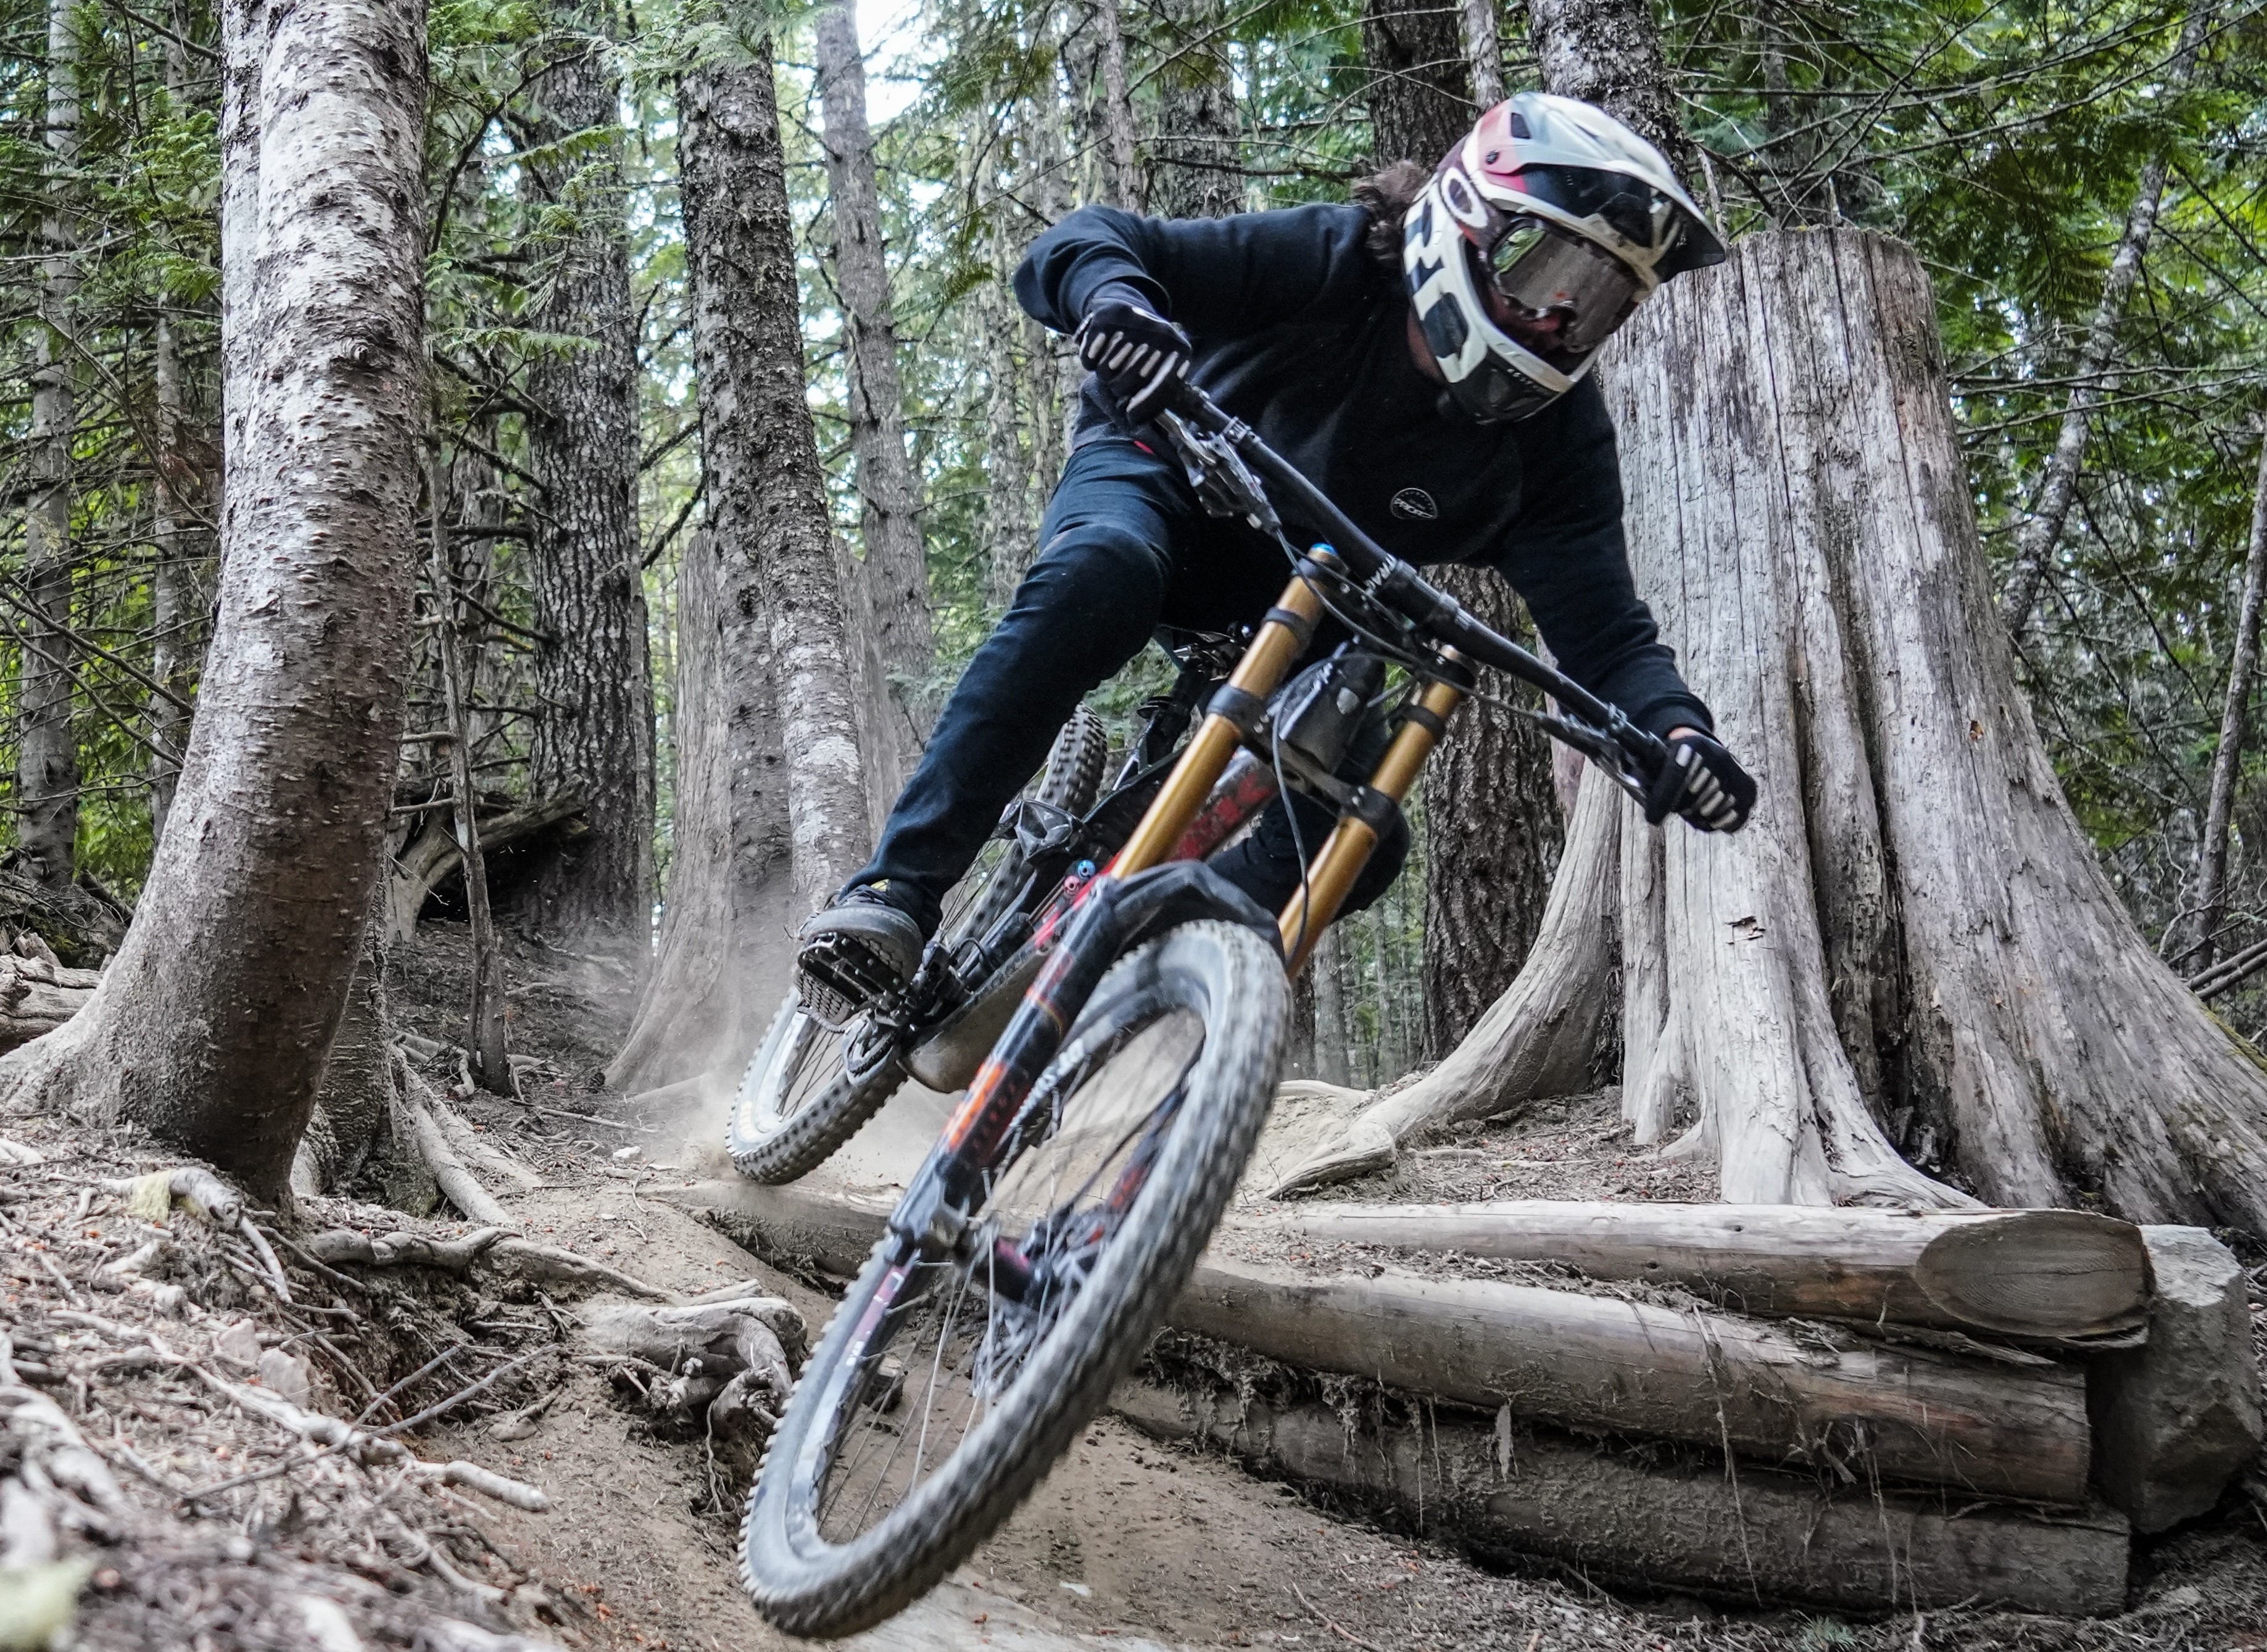 What protective gear do I need for Mountain biking